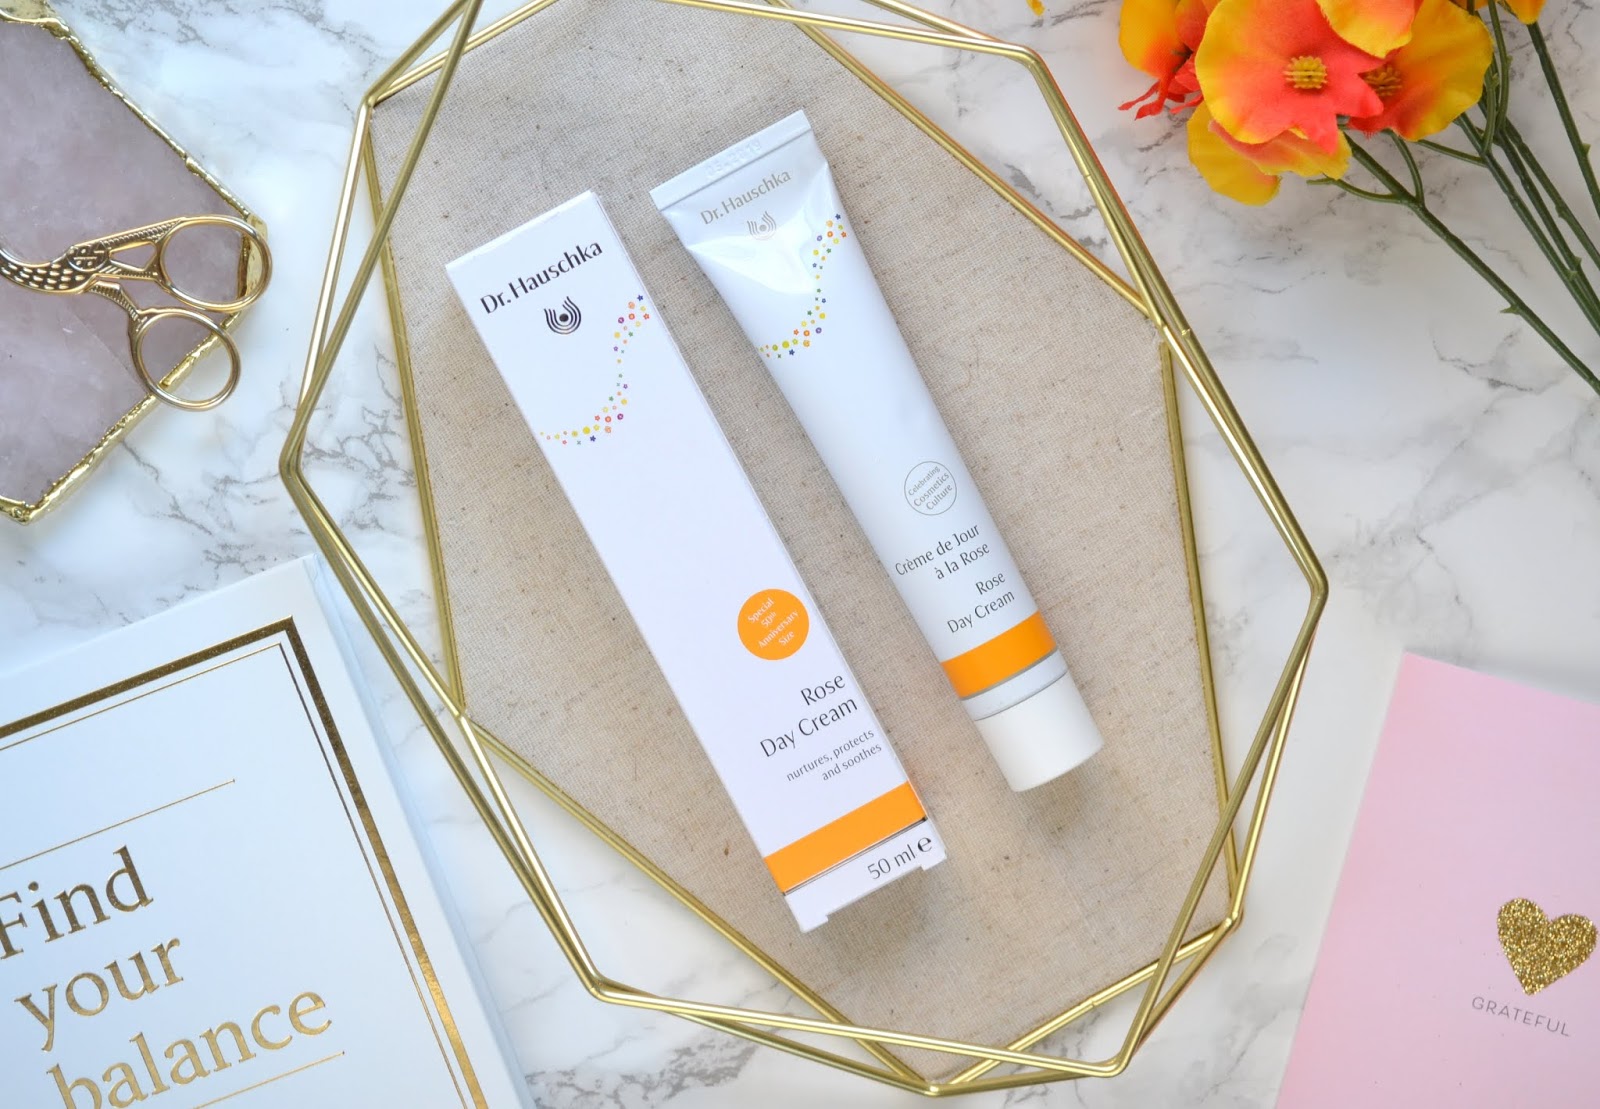 SKINCARE Hauschka Rose Day Cream #EarthMonth | Cosmetic | Vancouver beauty, nail art and lifestyle blog